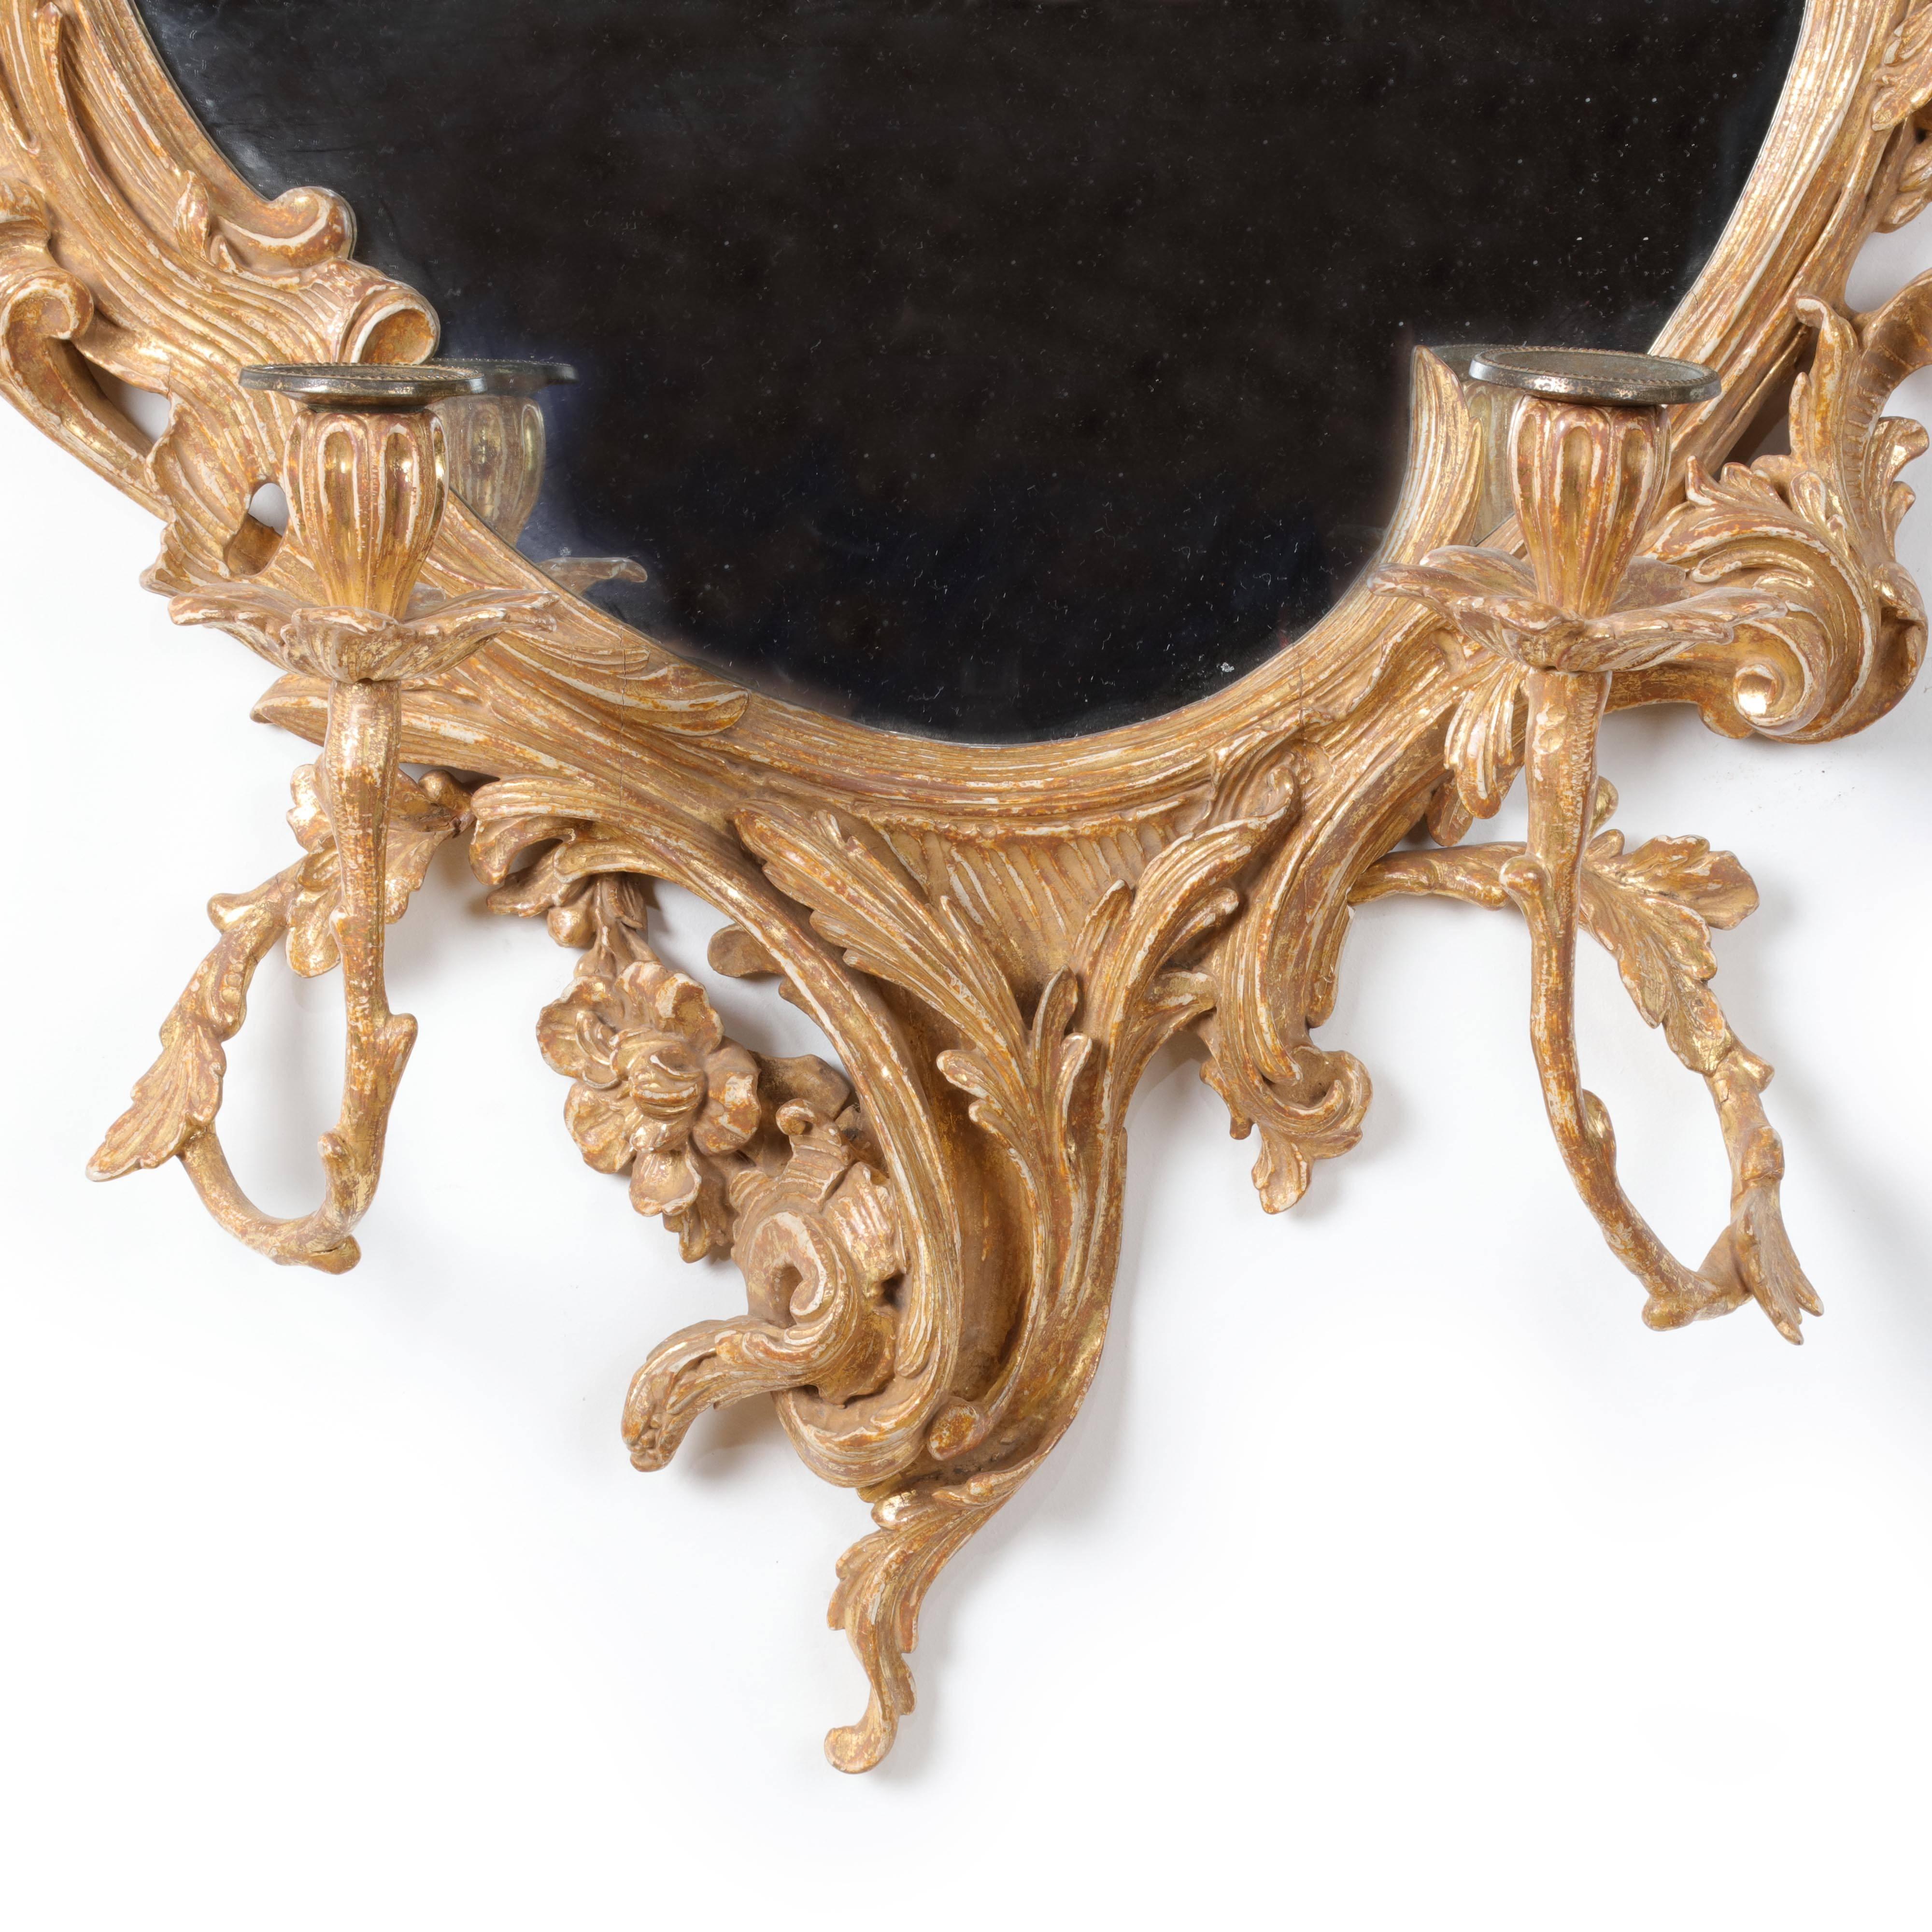 English George III Carved Giltwood Girandole Mirror Attributed to John Linnell